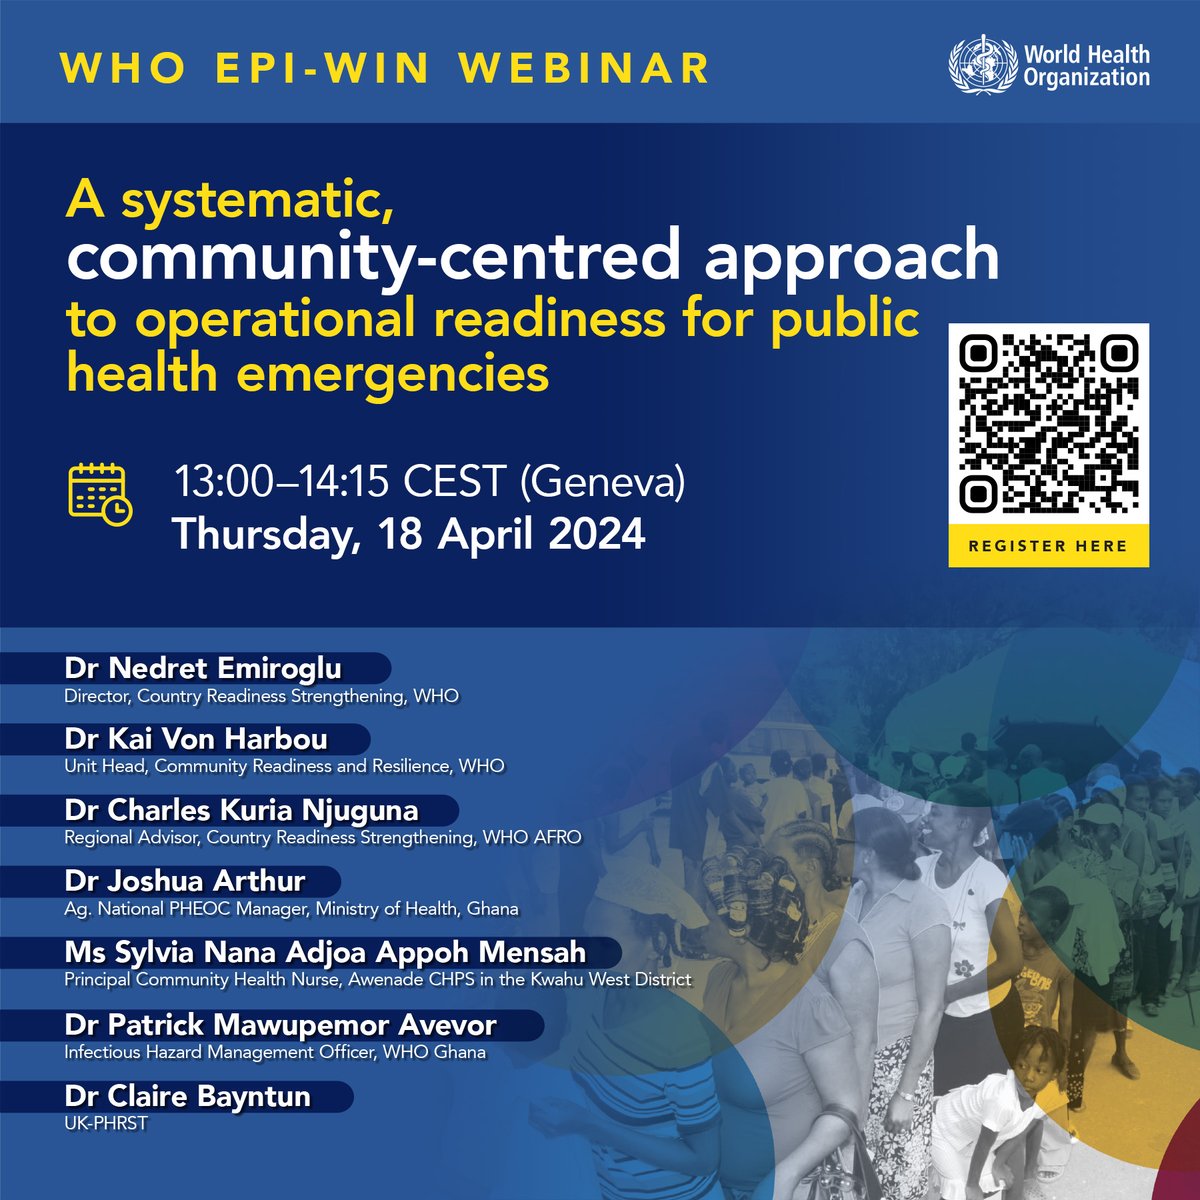 Do join our next @WHO #EPIWIN webinar on ' A systematic, community-centred approach to operational readiness for public health emergencies', on 18 April 2024, 13.00 - 14.15 hr CEST Register here: who.zoom.us/webinar/regist…